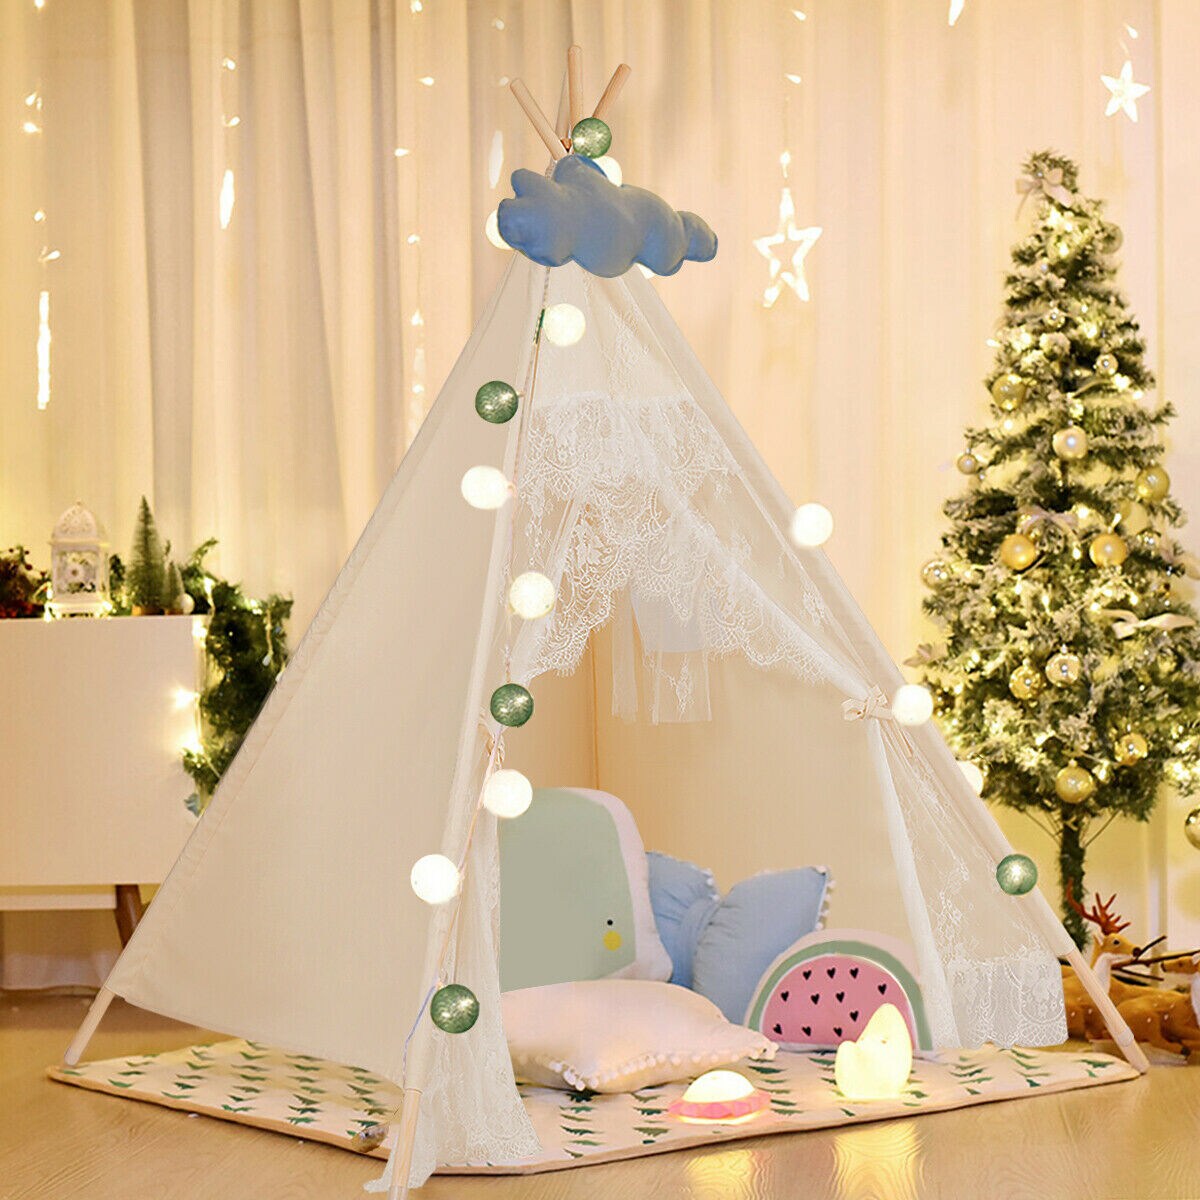 Gymax Kids Lace Teepee Tent Folding Children Playhouse W/Bag Christmas